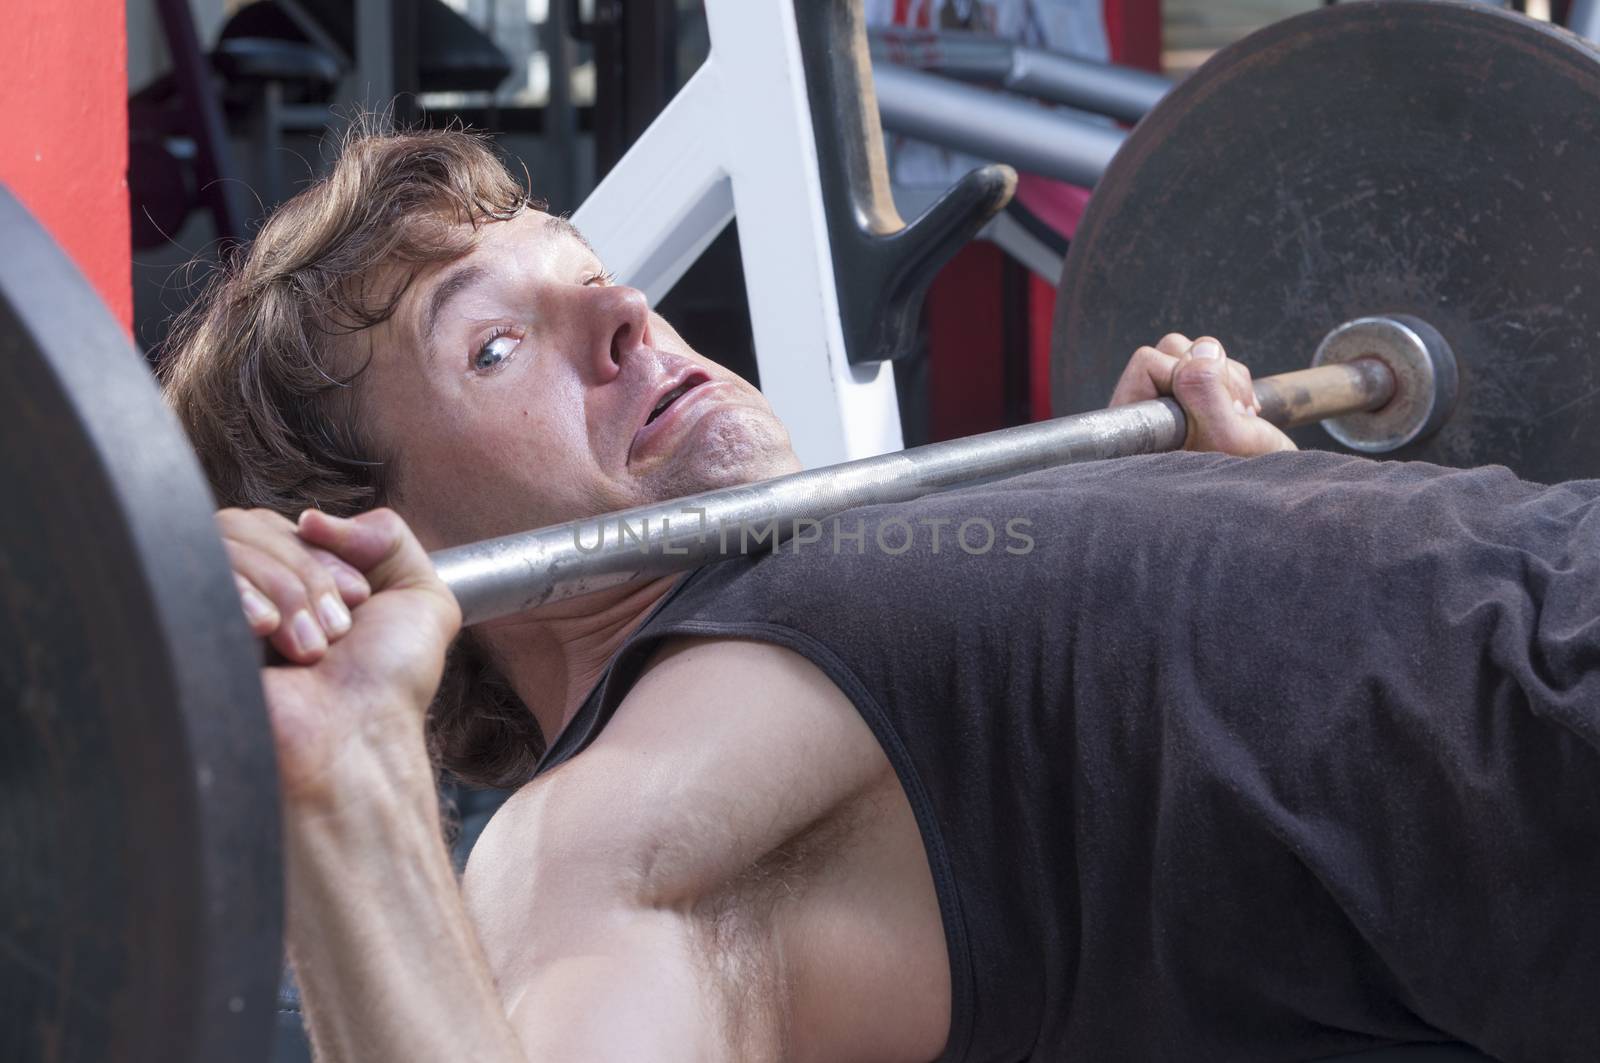 Caucasian man working out in gym is stuck under heavy barbell on bench press